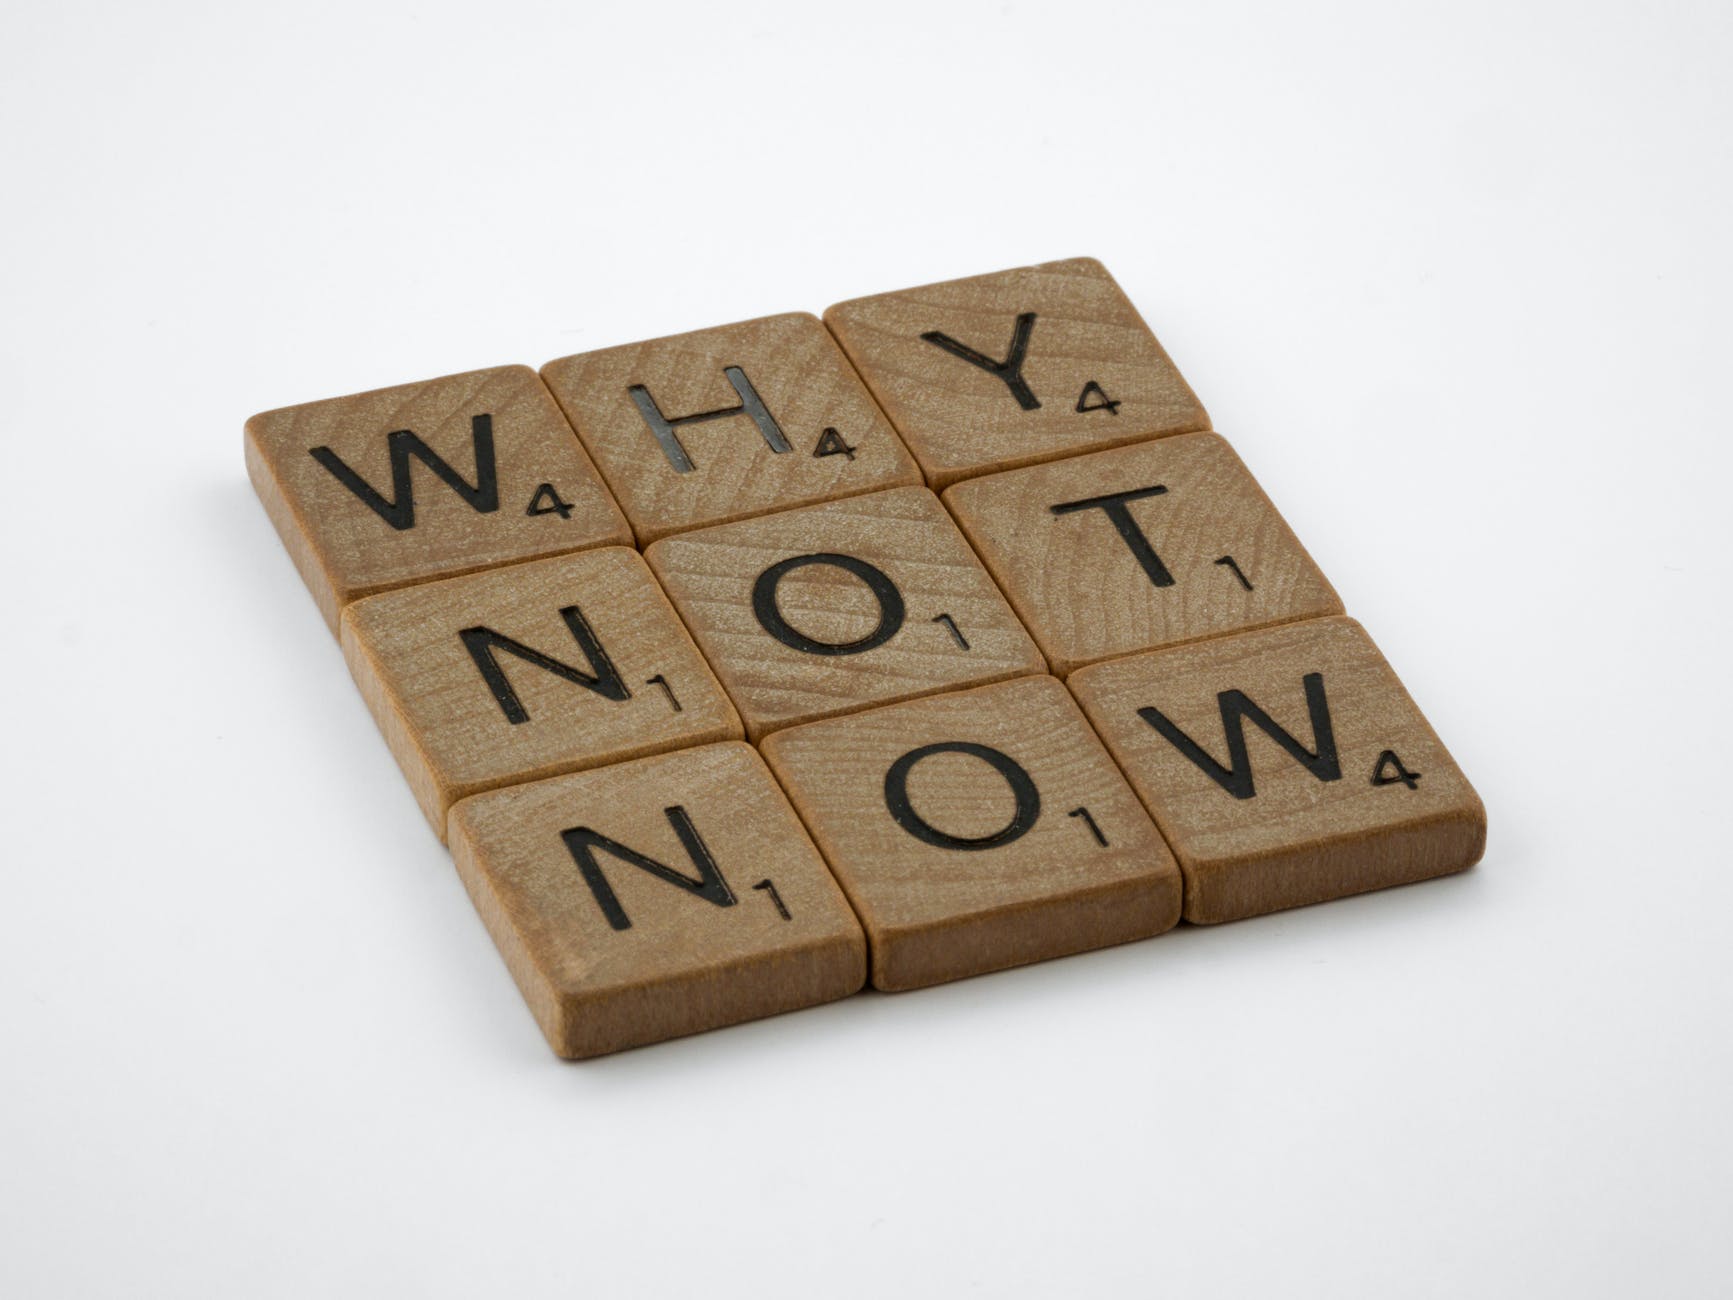 Scrabble tiles spelling out the words "Why not now"